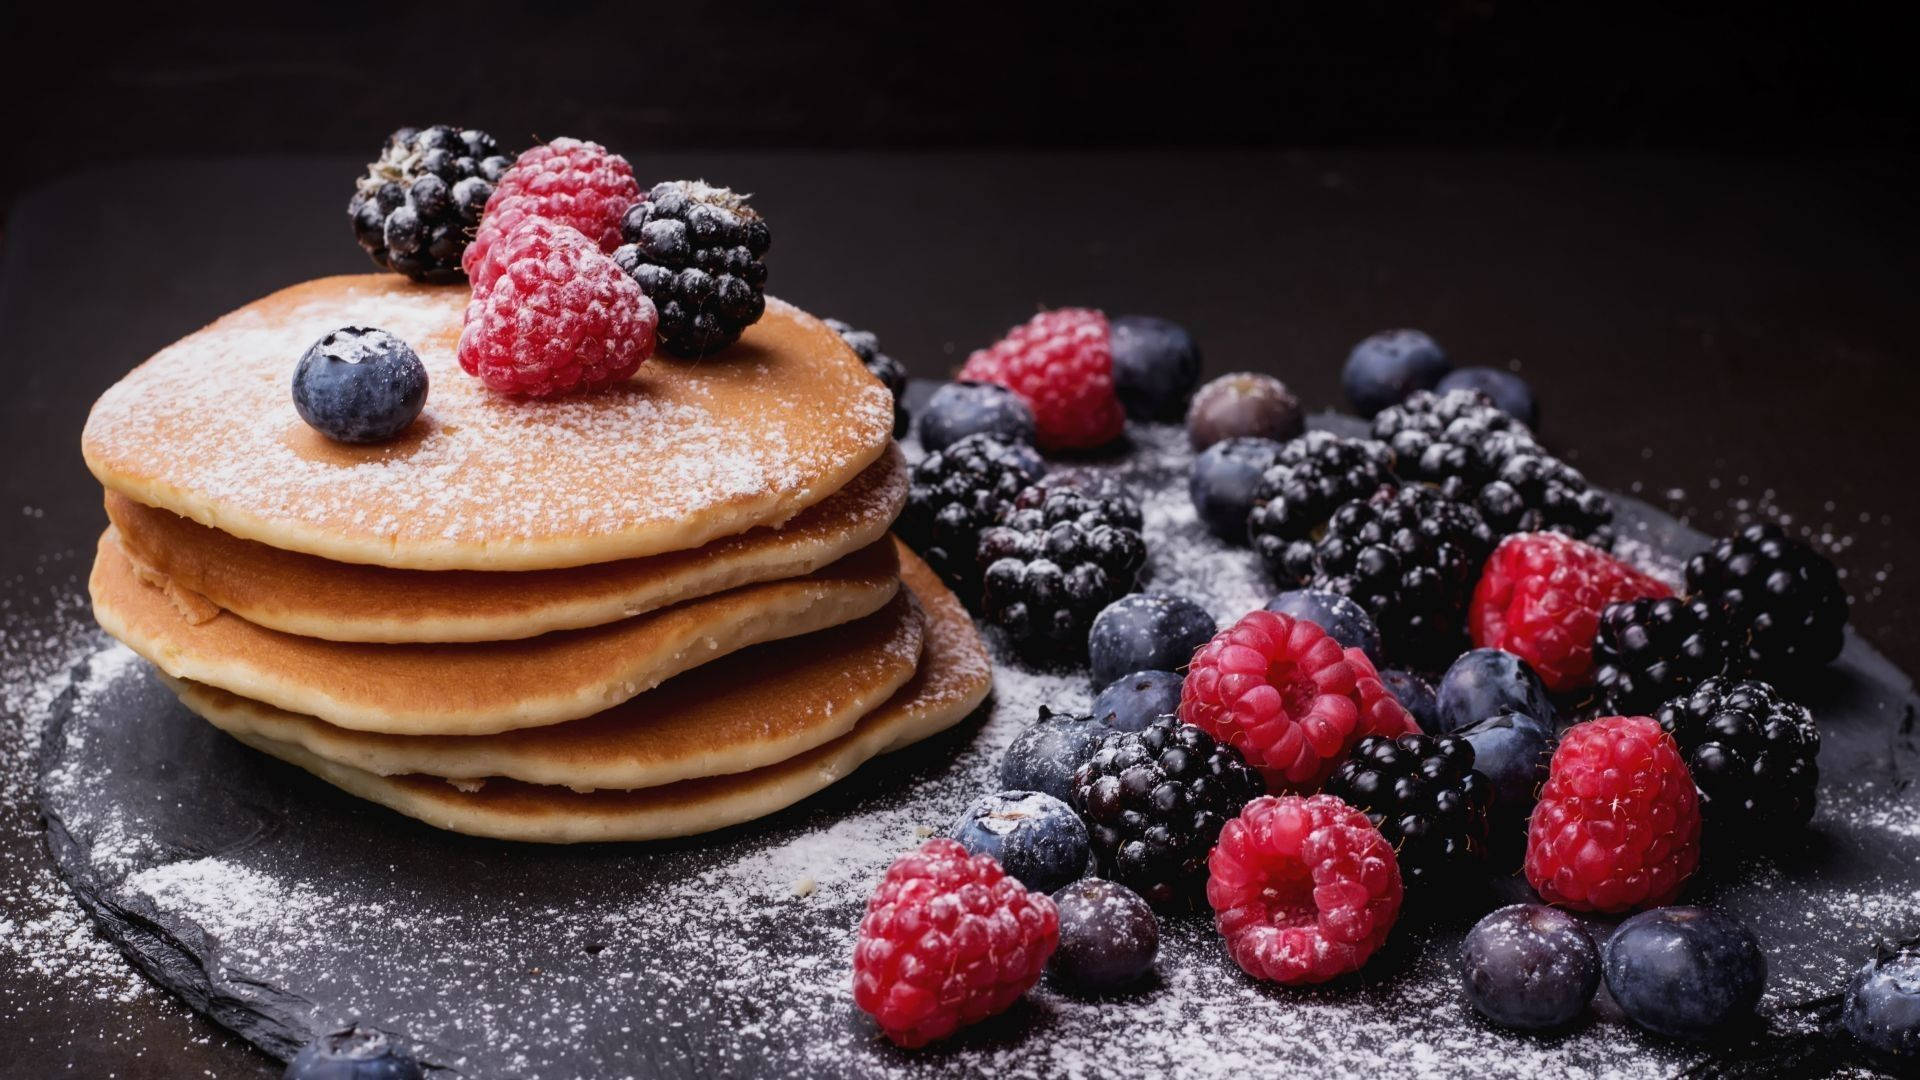 Pancakes With Sugar And Berries